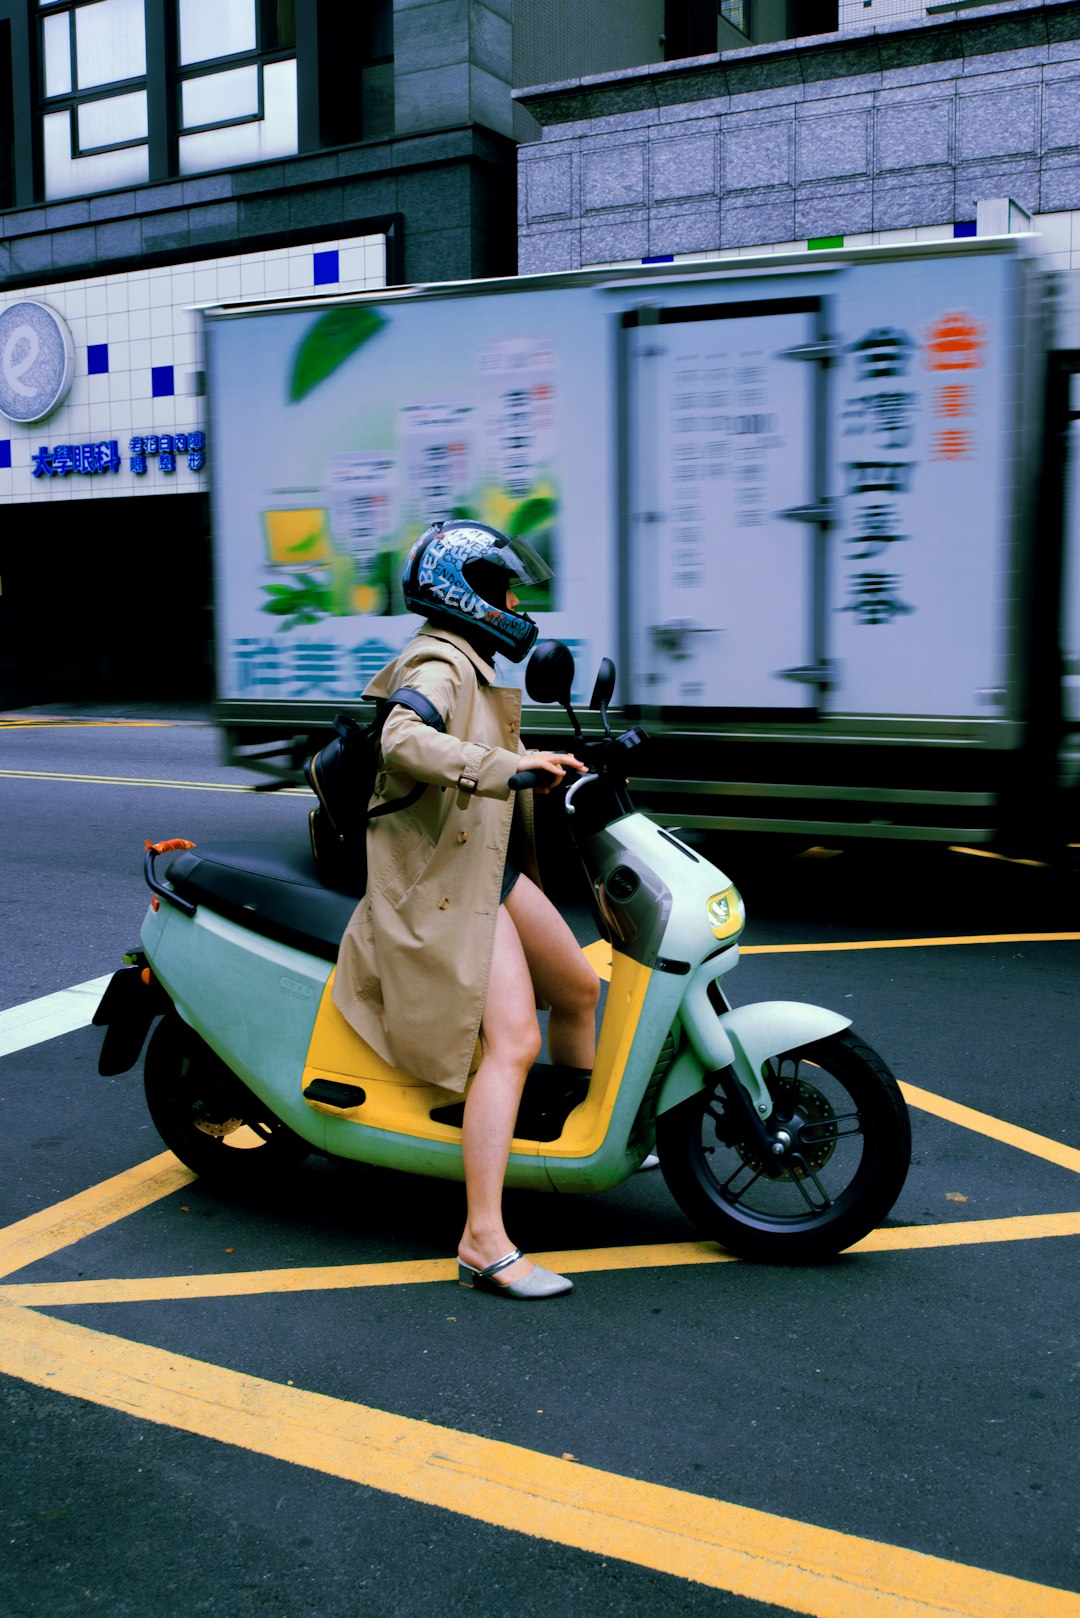 woman in yellow jacket riding yellow motor scooter during daytime